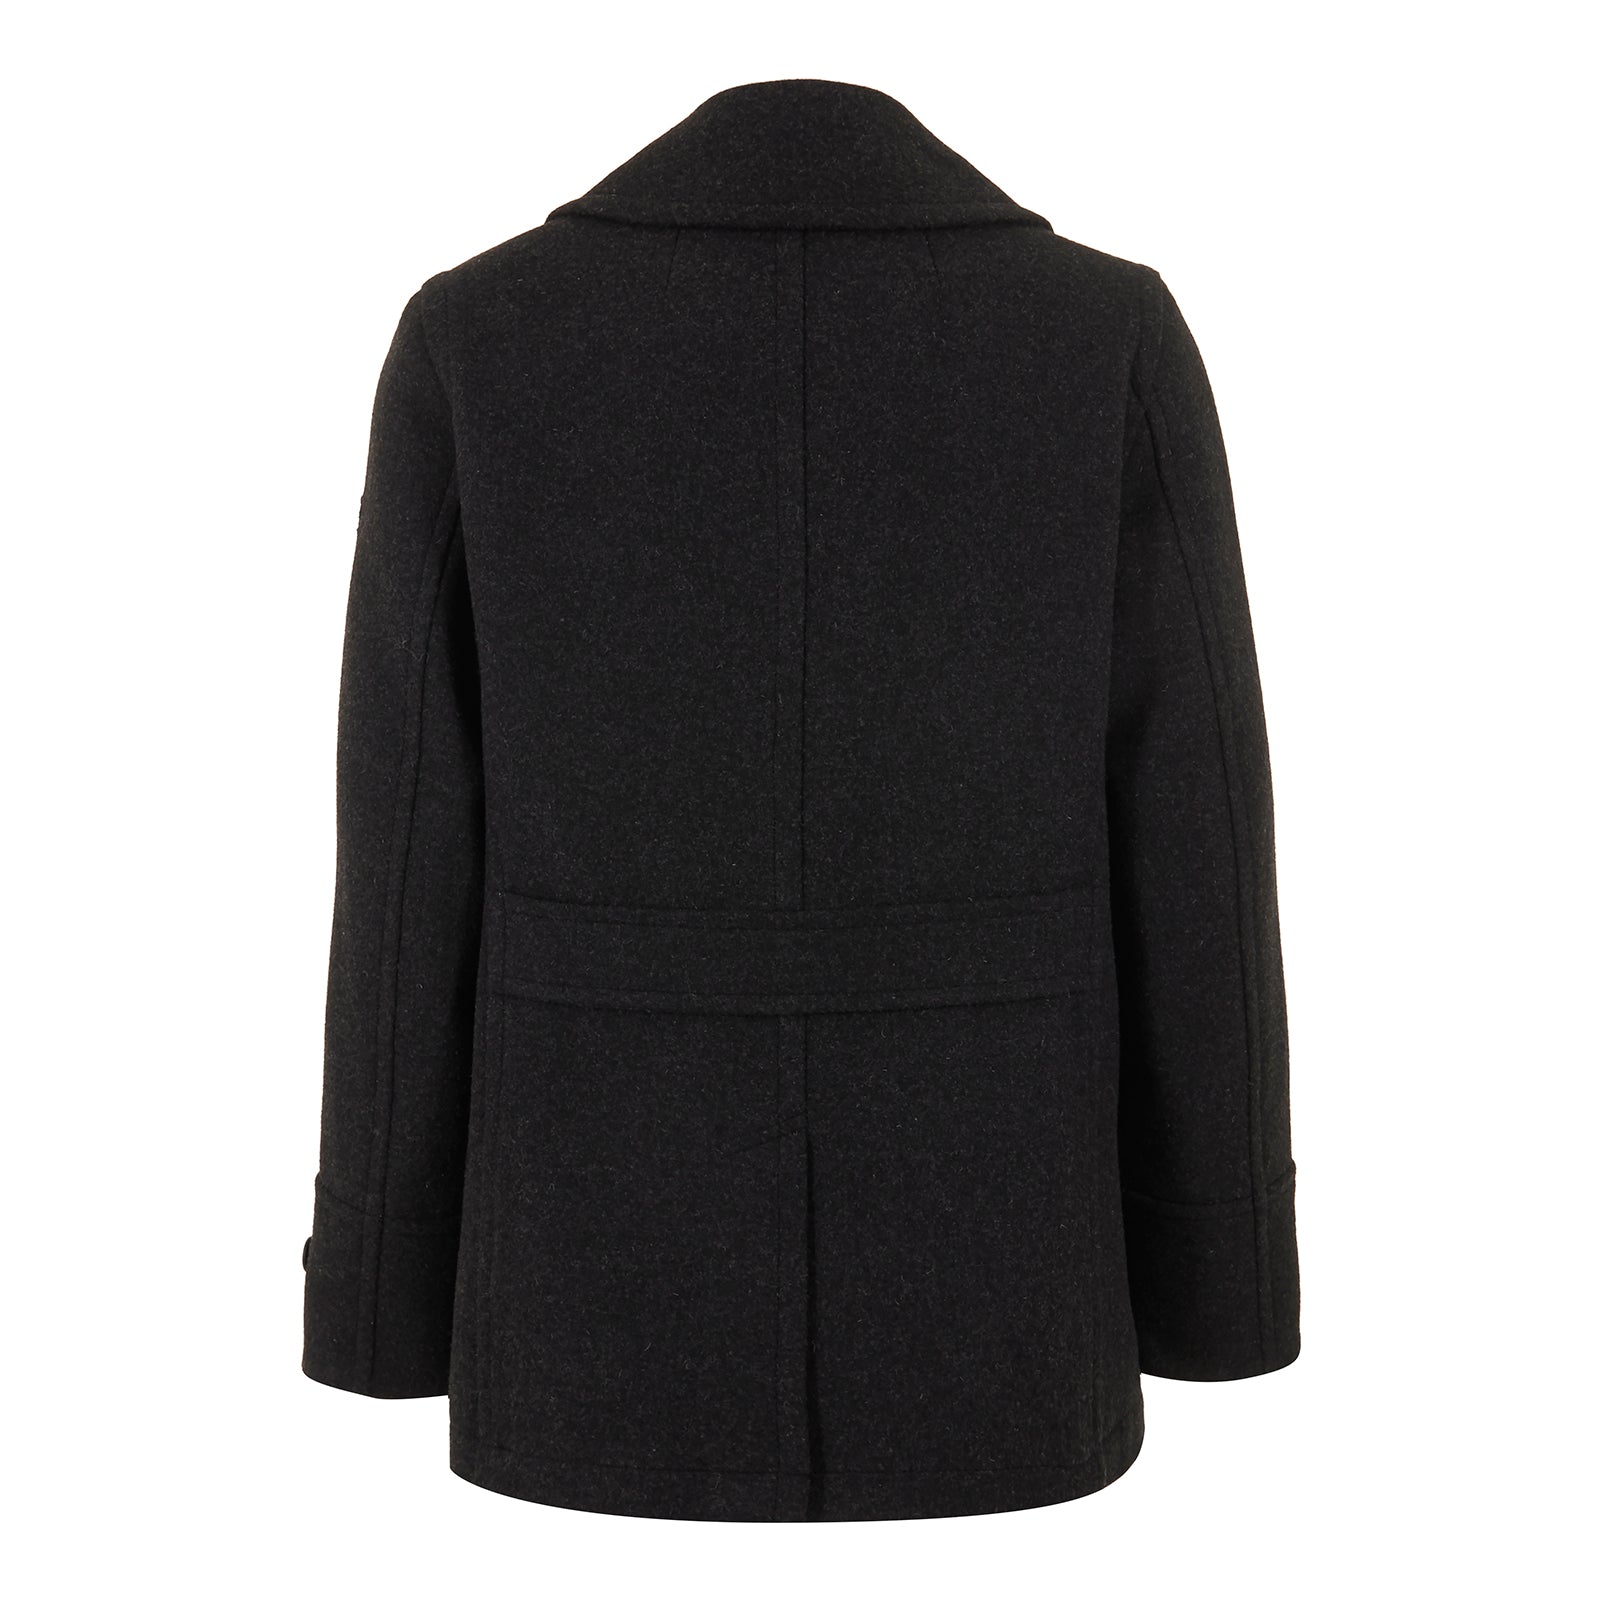 Walesby Tailored Wool Overcoat – Merc